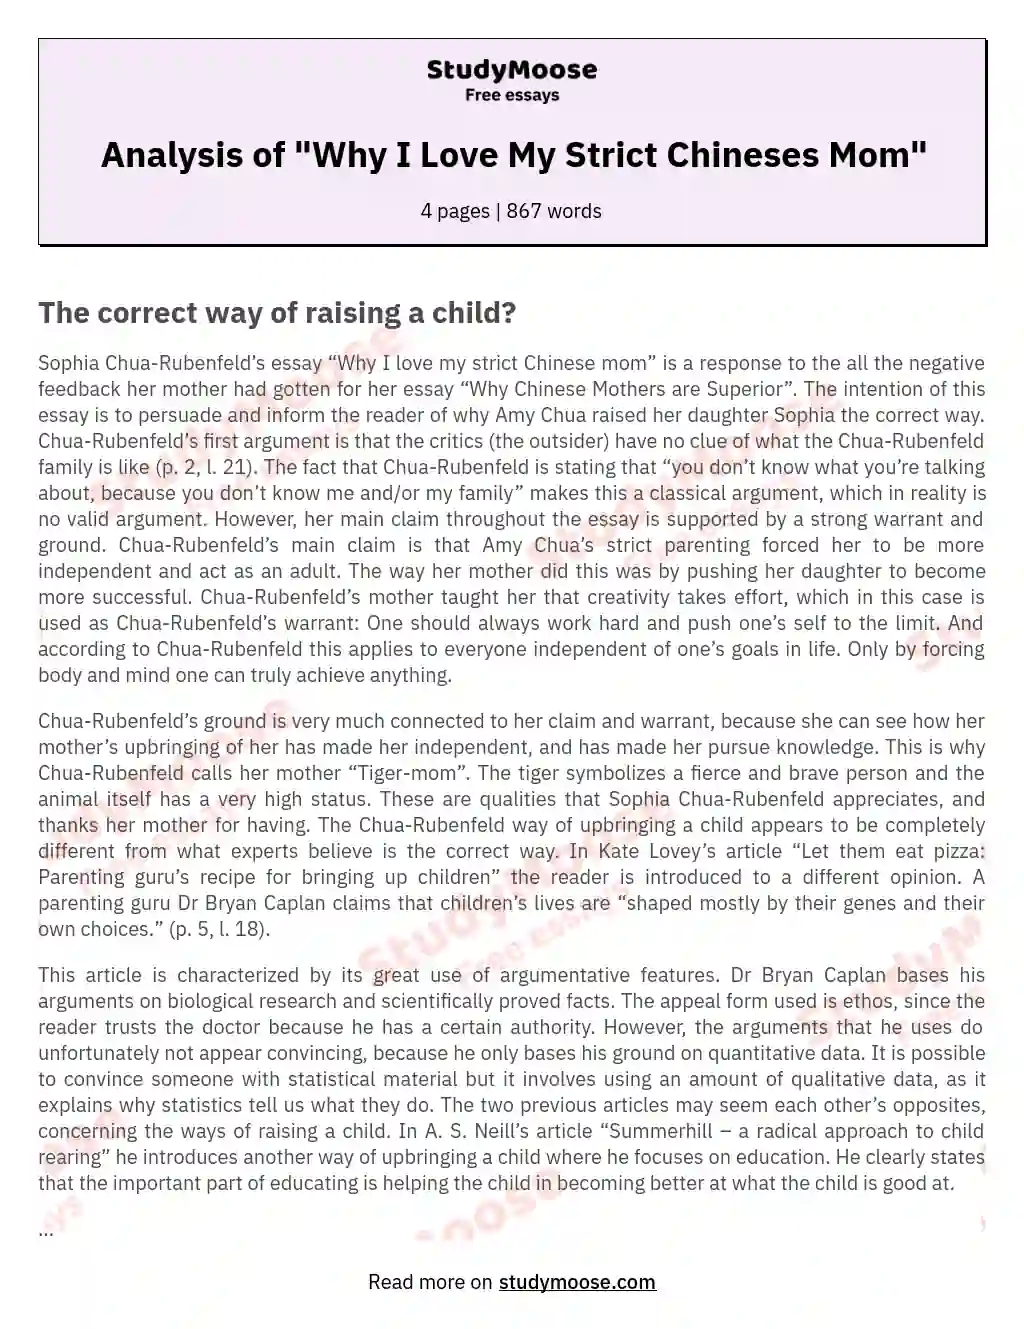 Analysis of "Why I Love My Strict Chineses Mom" essay